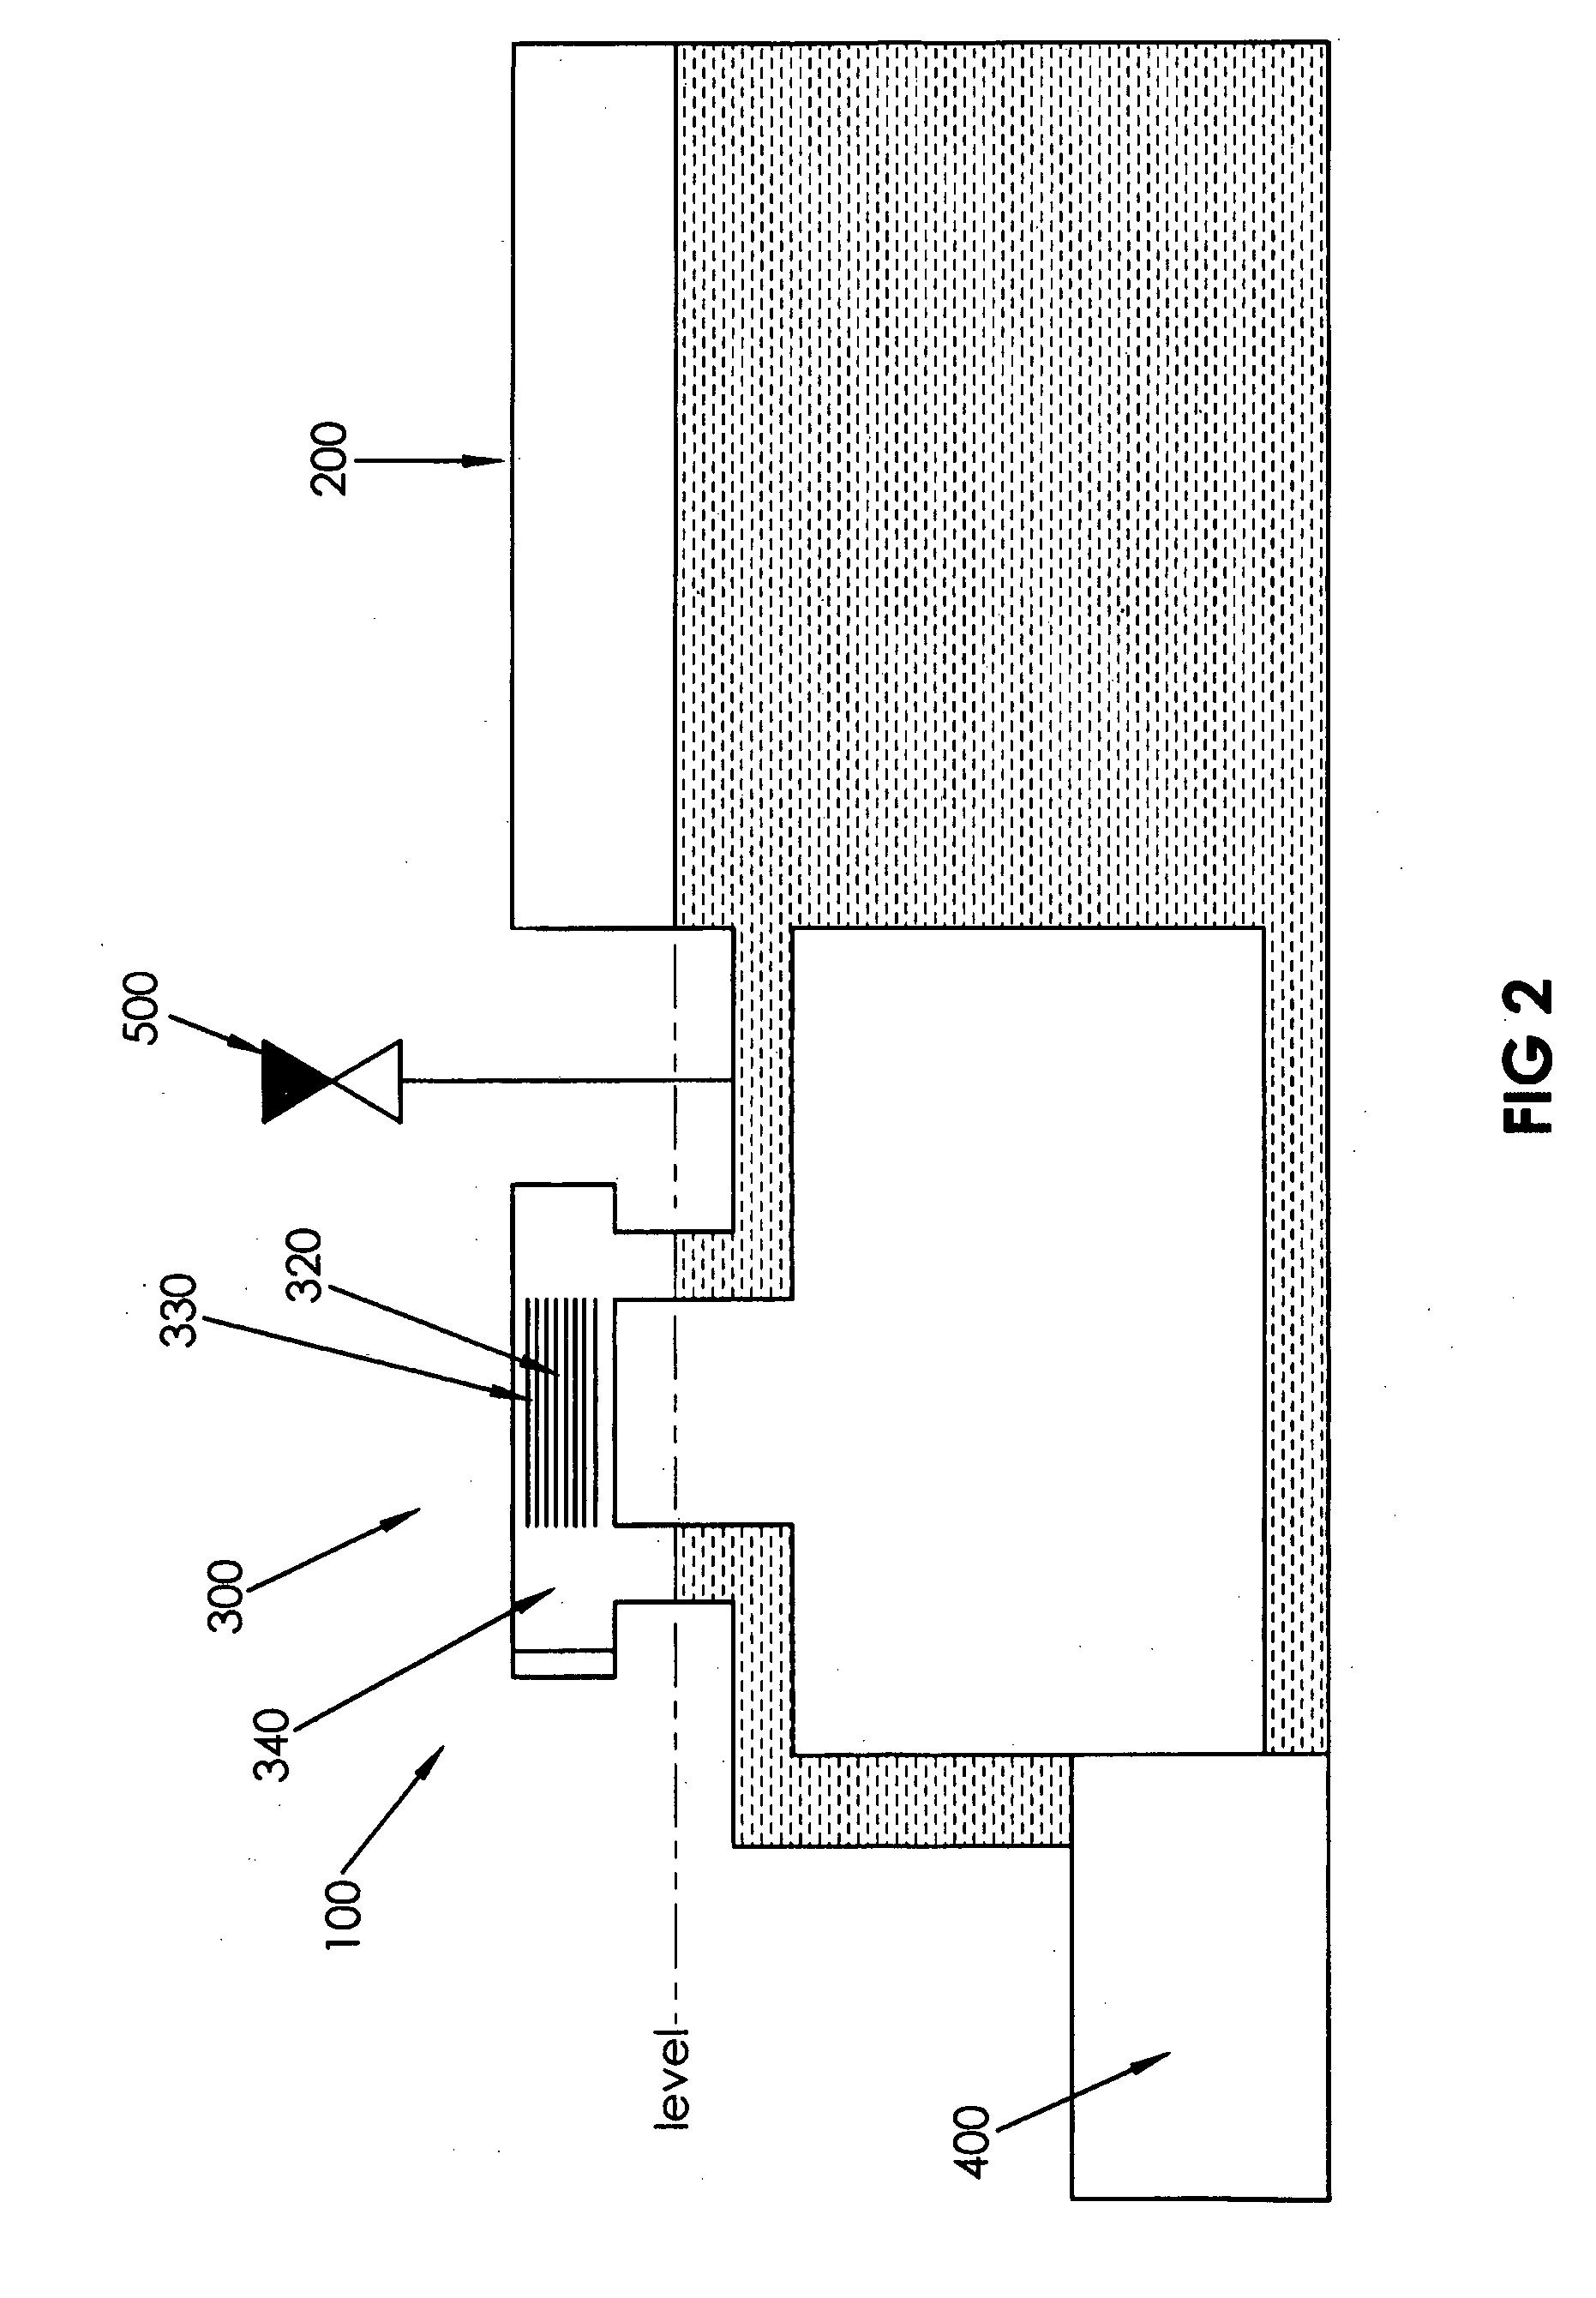 Arrangement and method for pool safety and cleaning an electrolytic cell